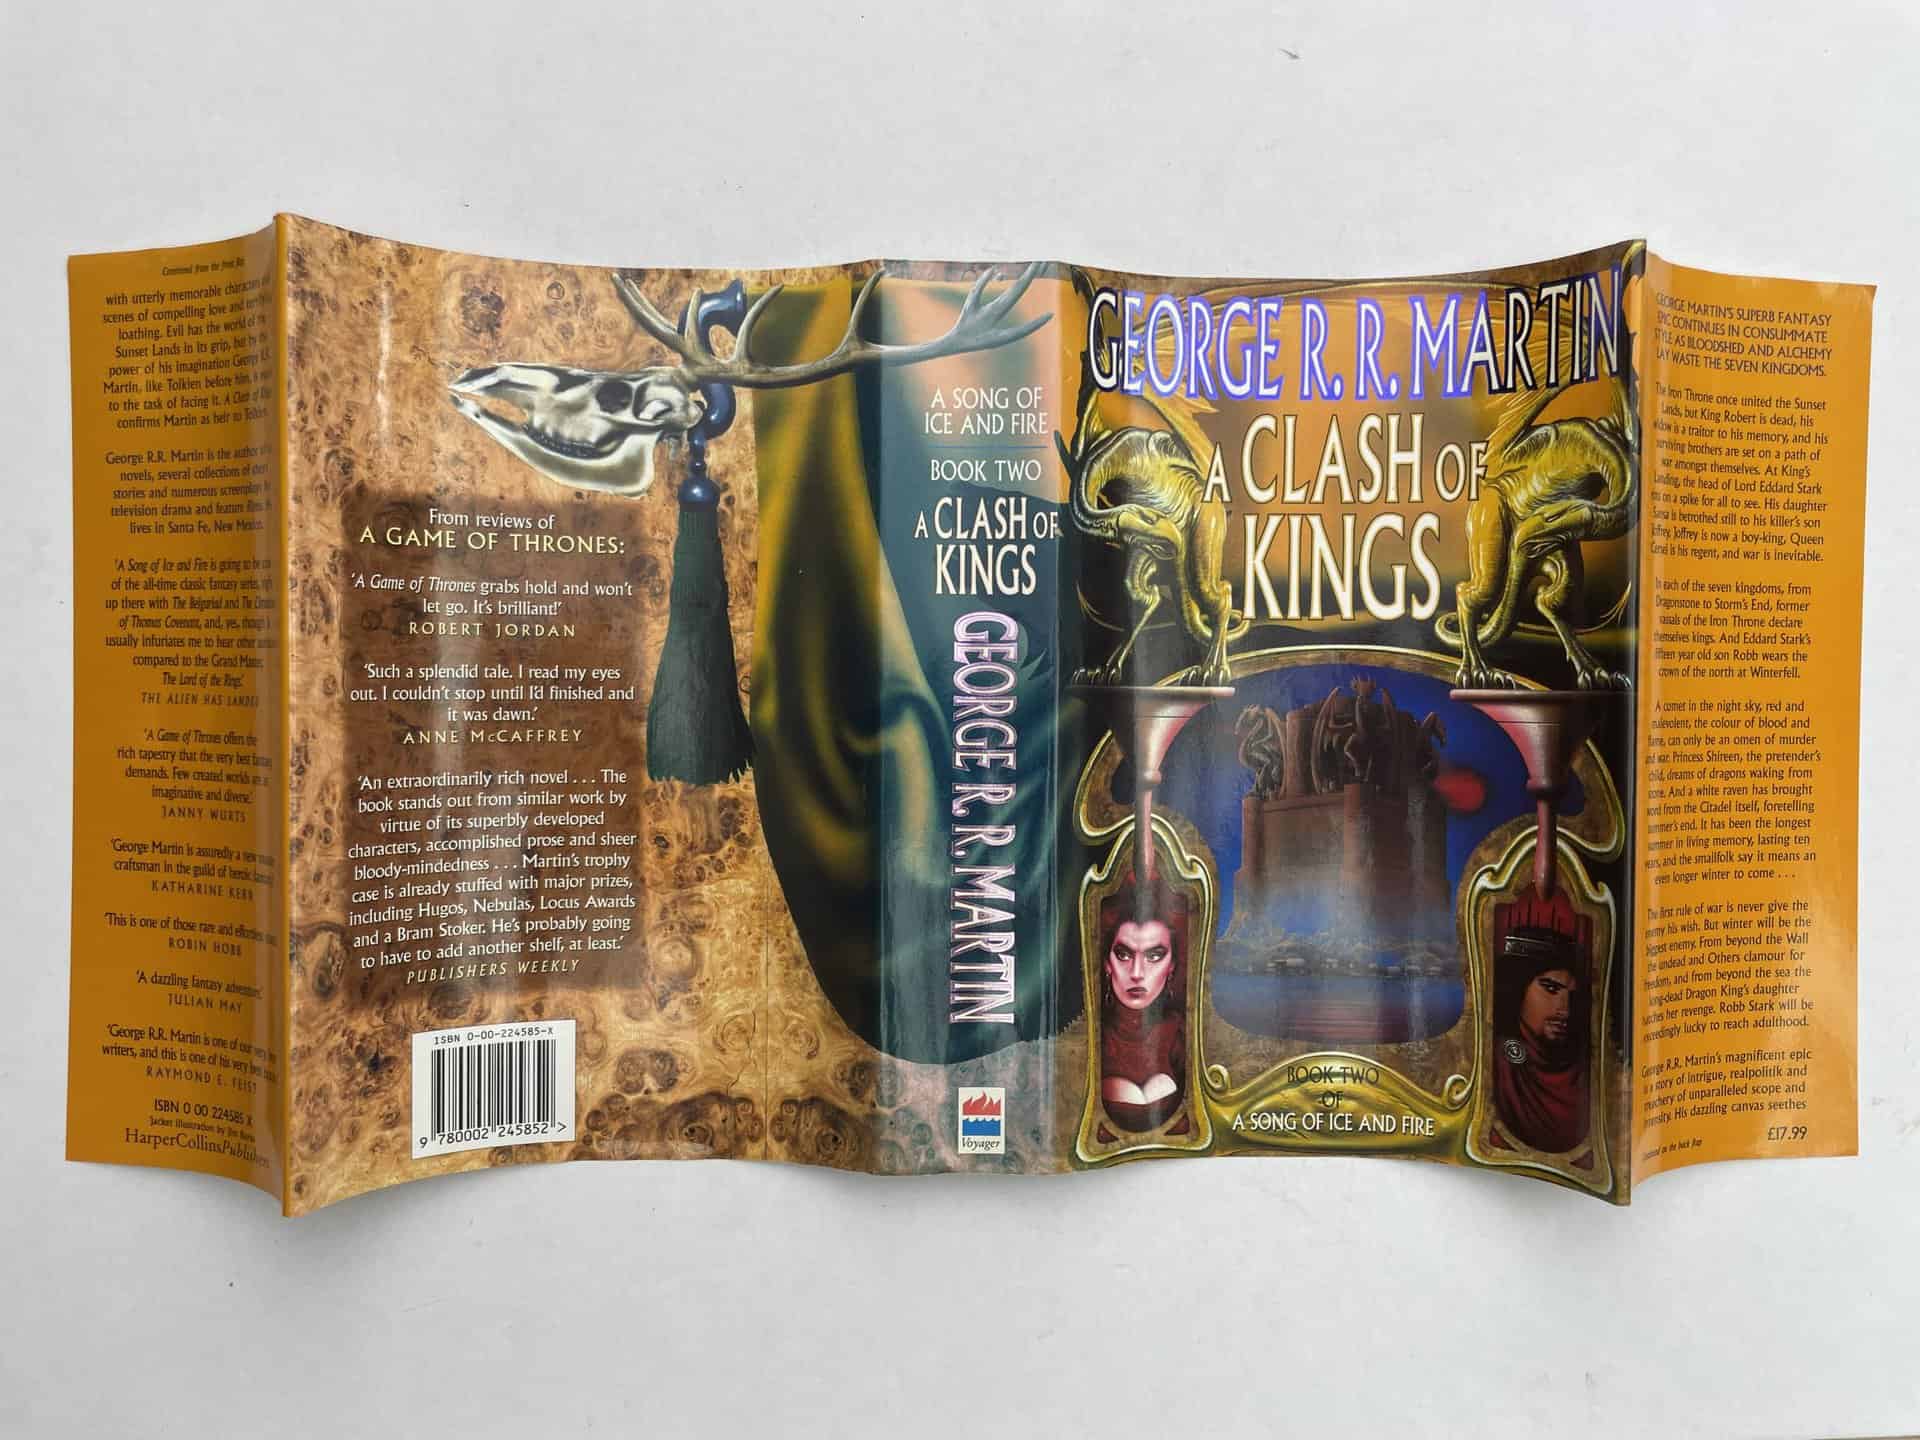 George R.R. Martin - A Clash Of Kings - First UK Edition 1997